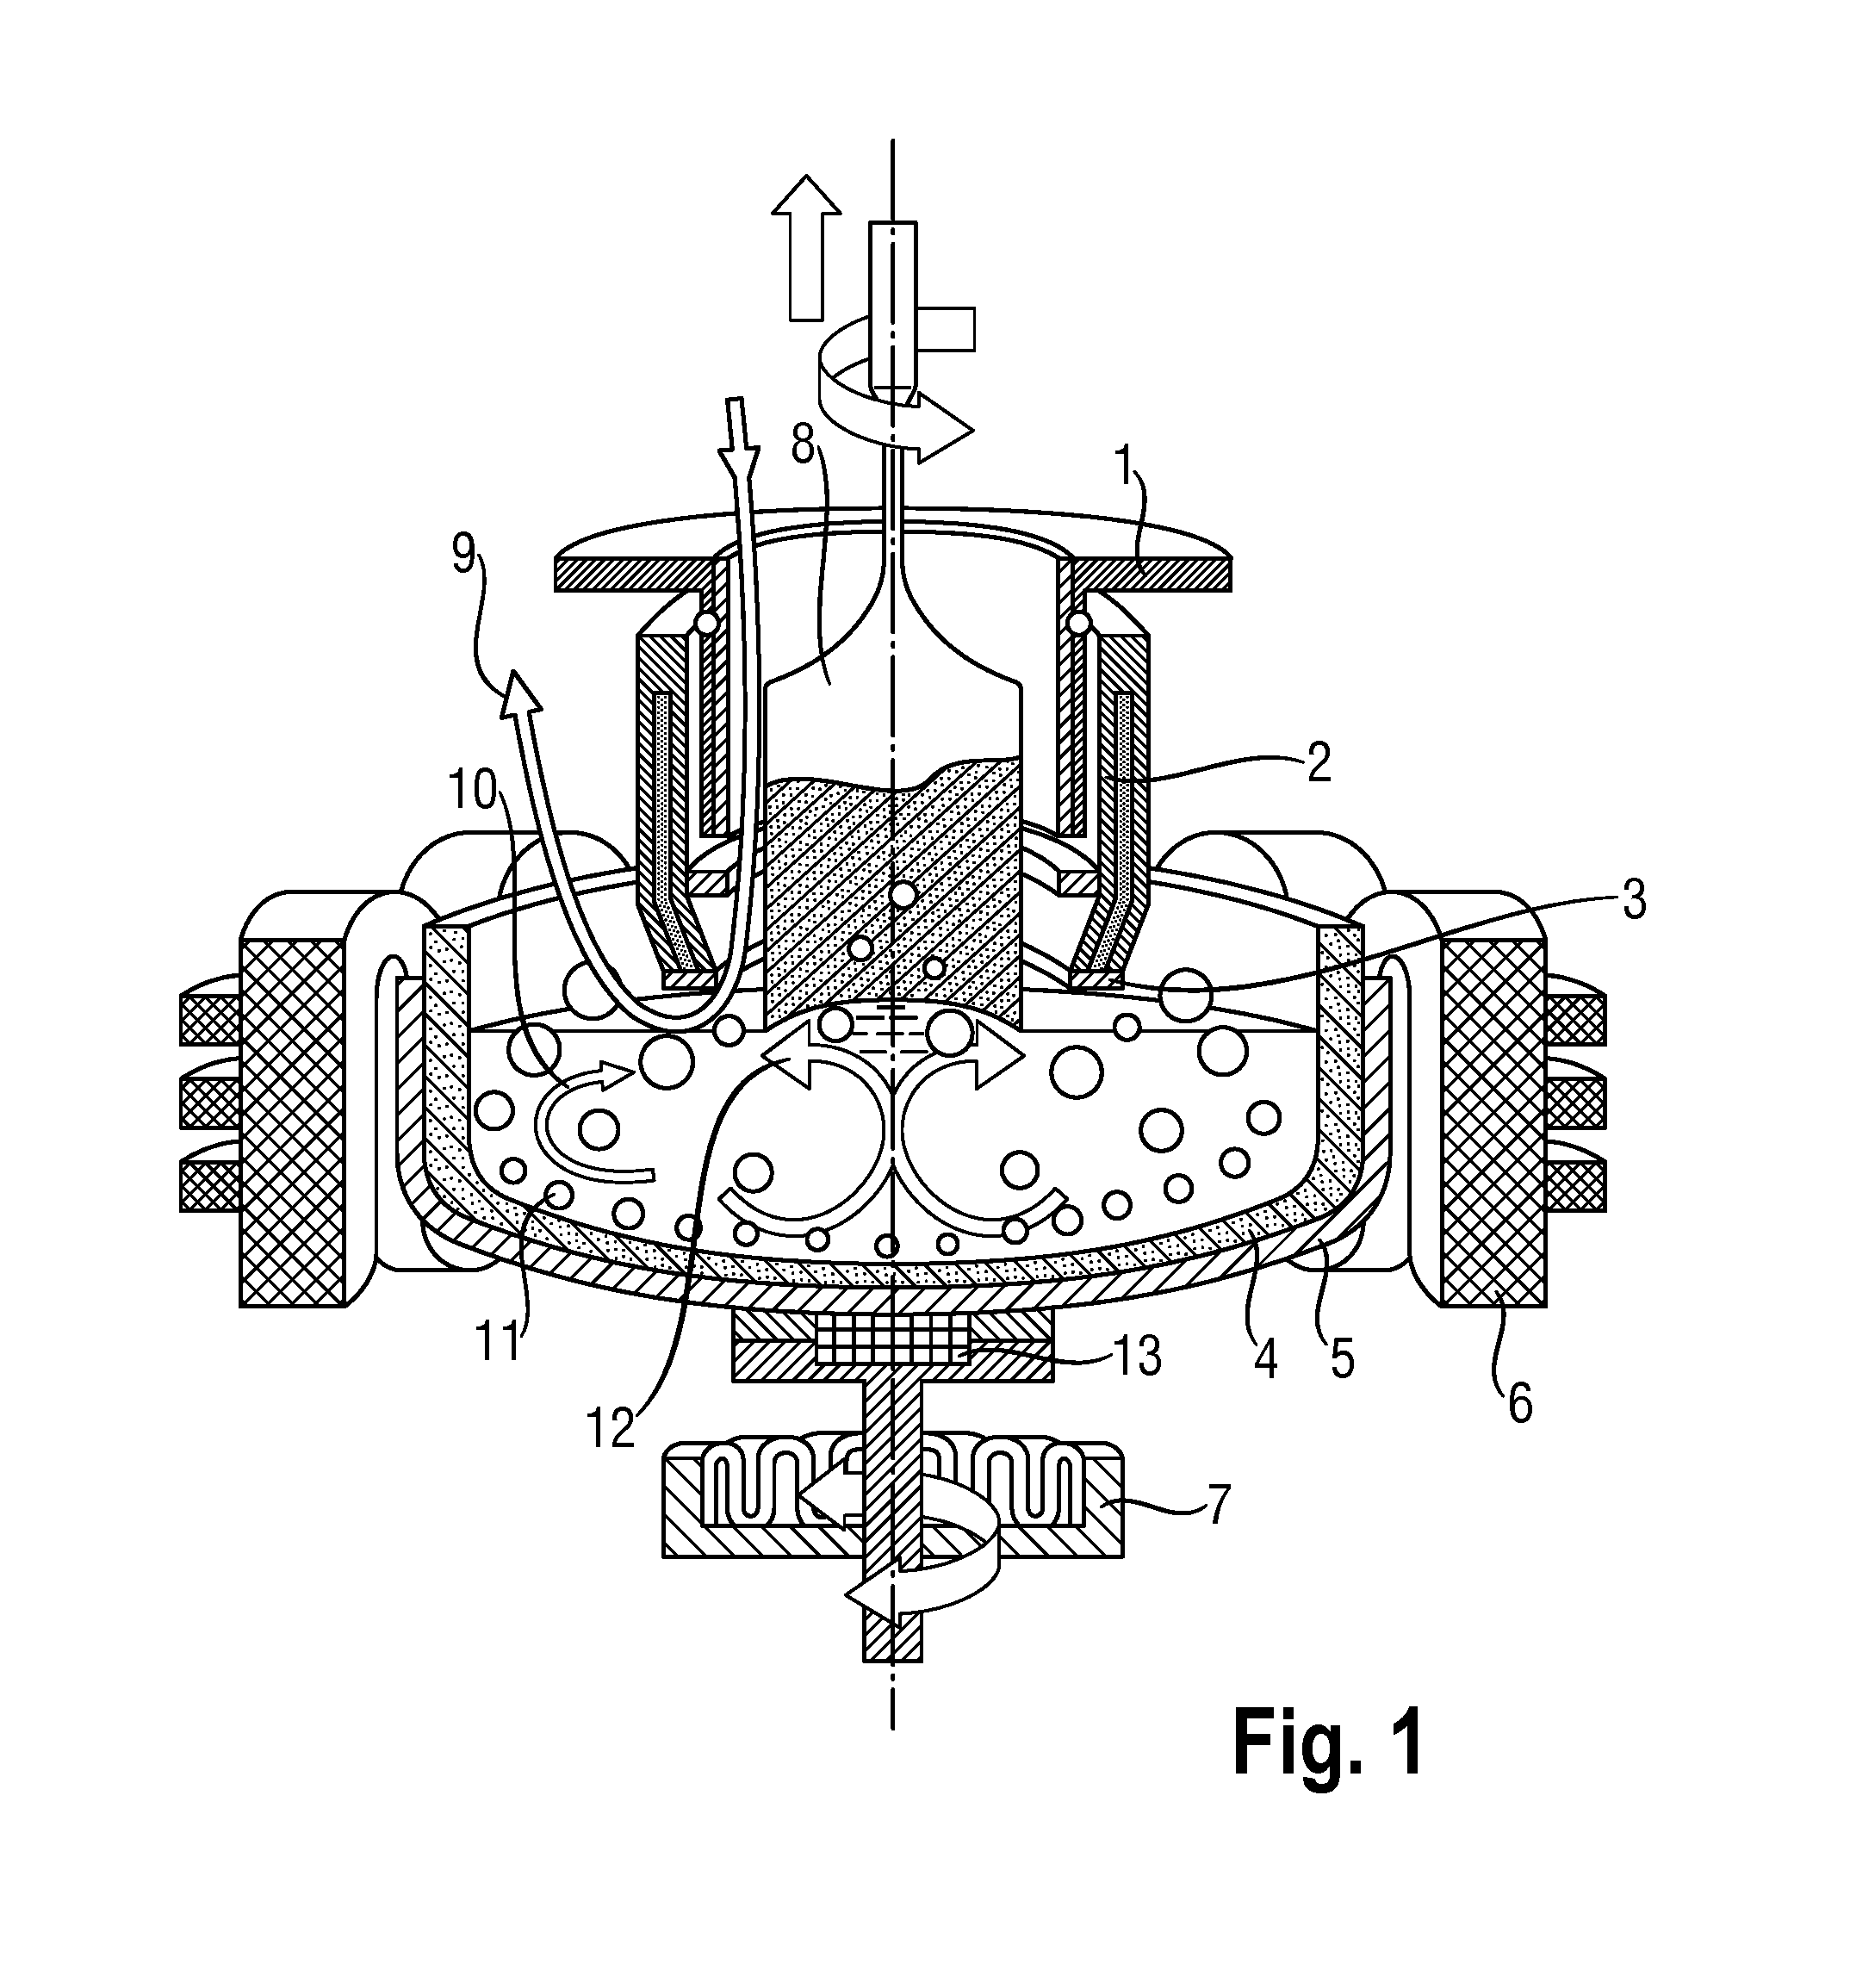 Method For Producing Semiconductor Wafers Composed Of Silicon